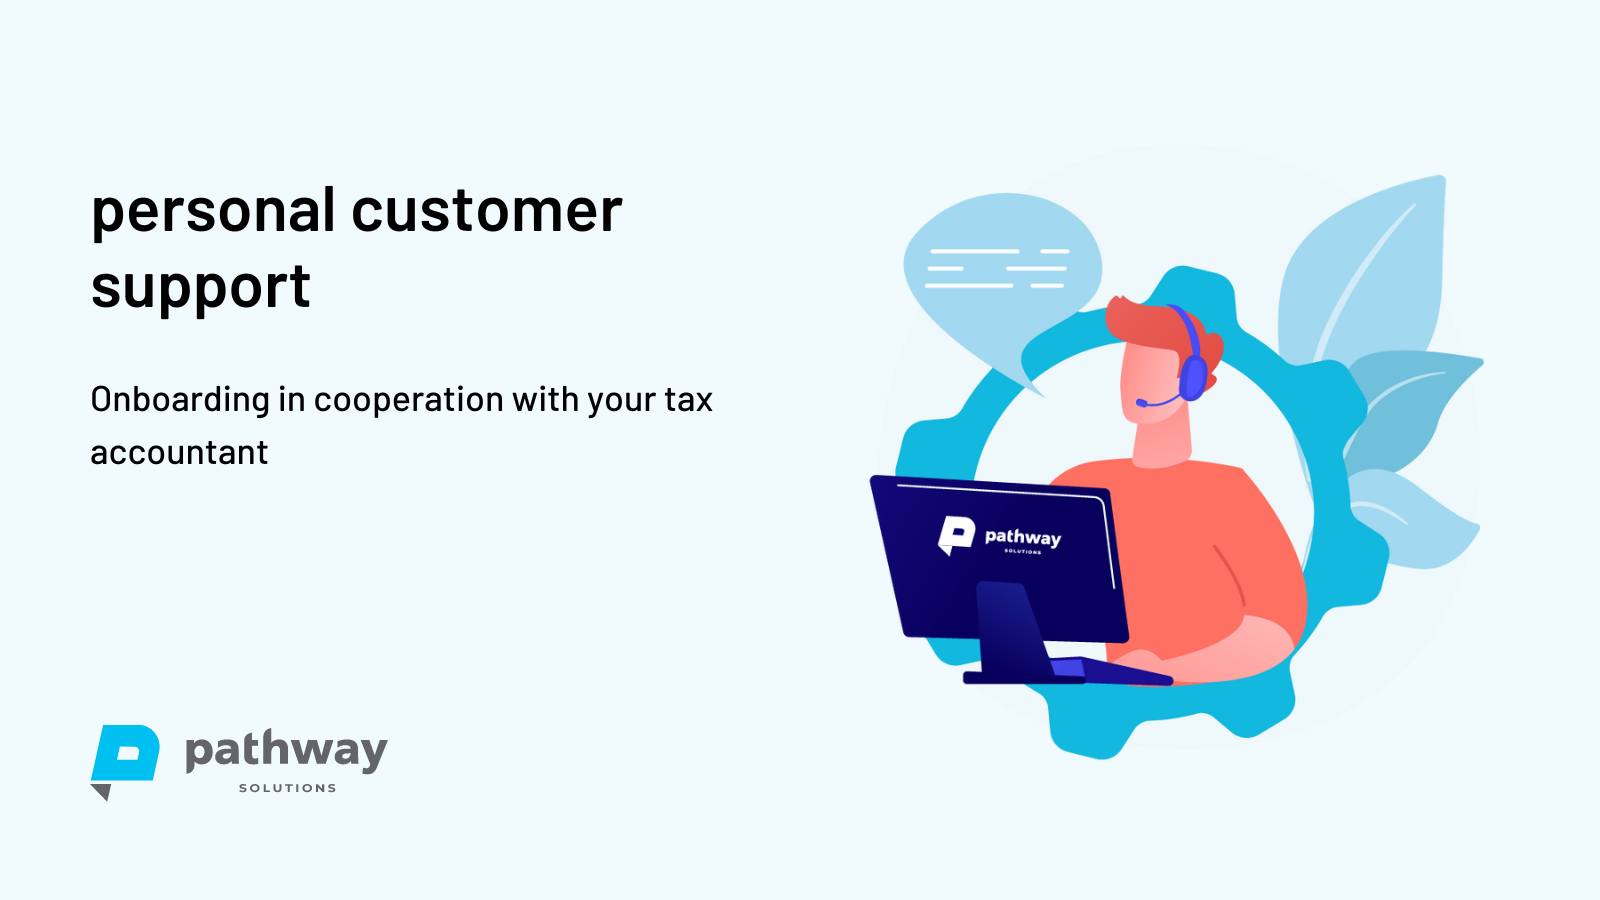 Onboarding in cooperation with youe tax accountant